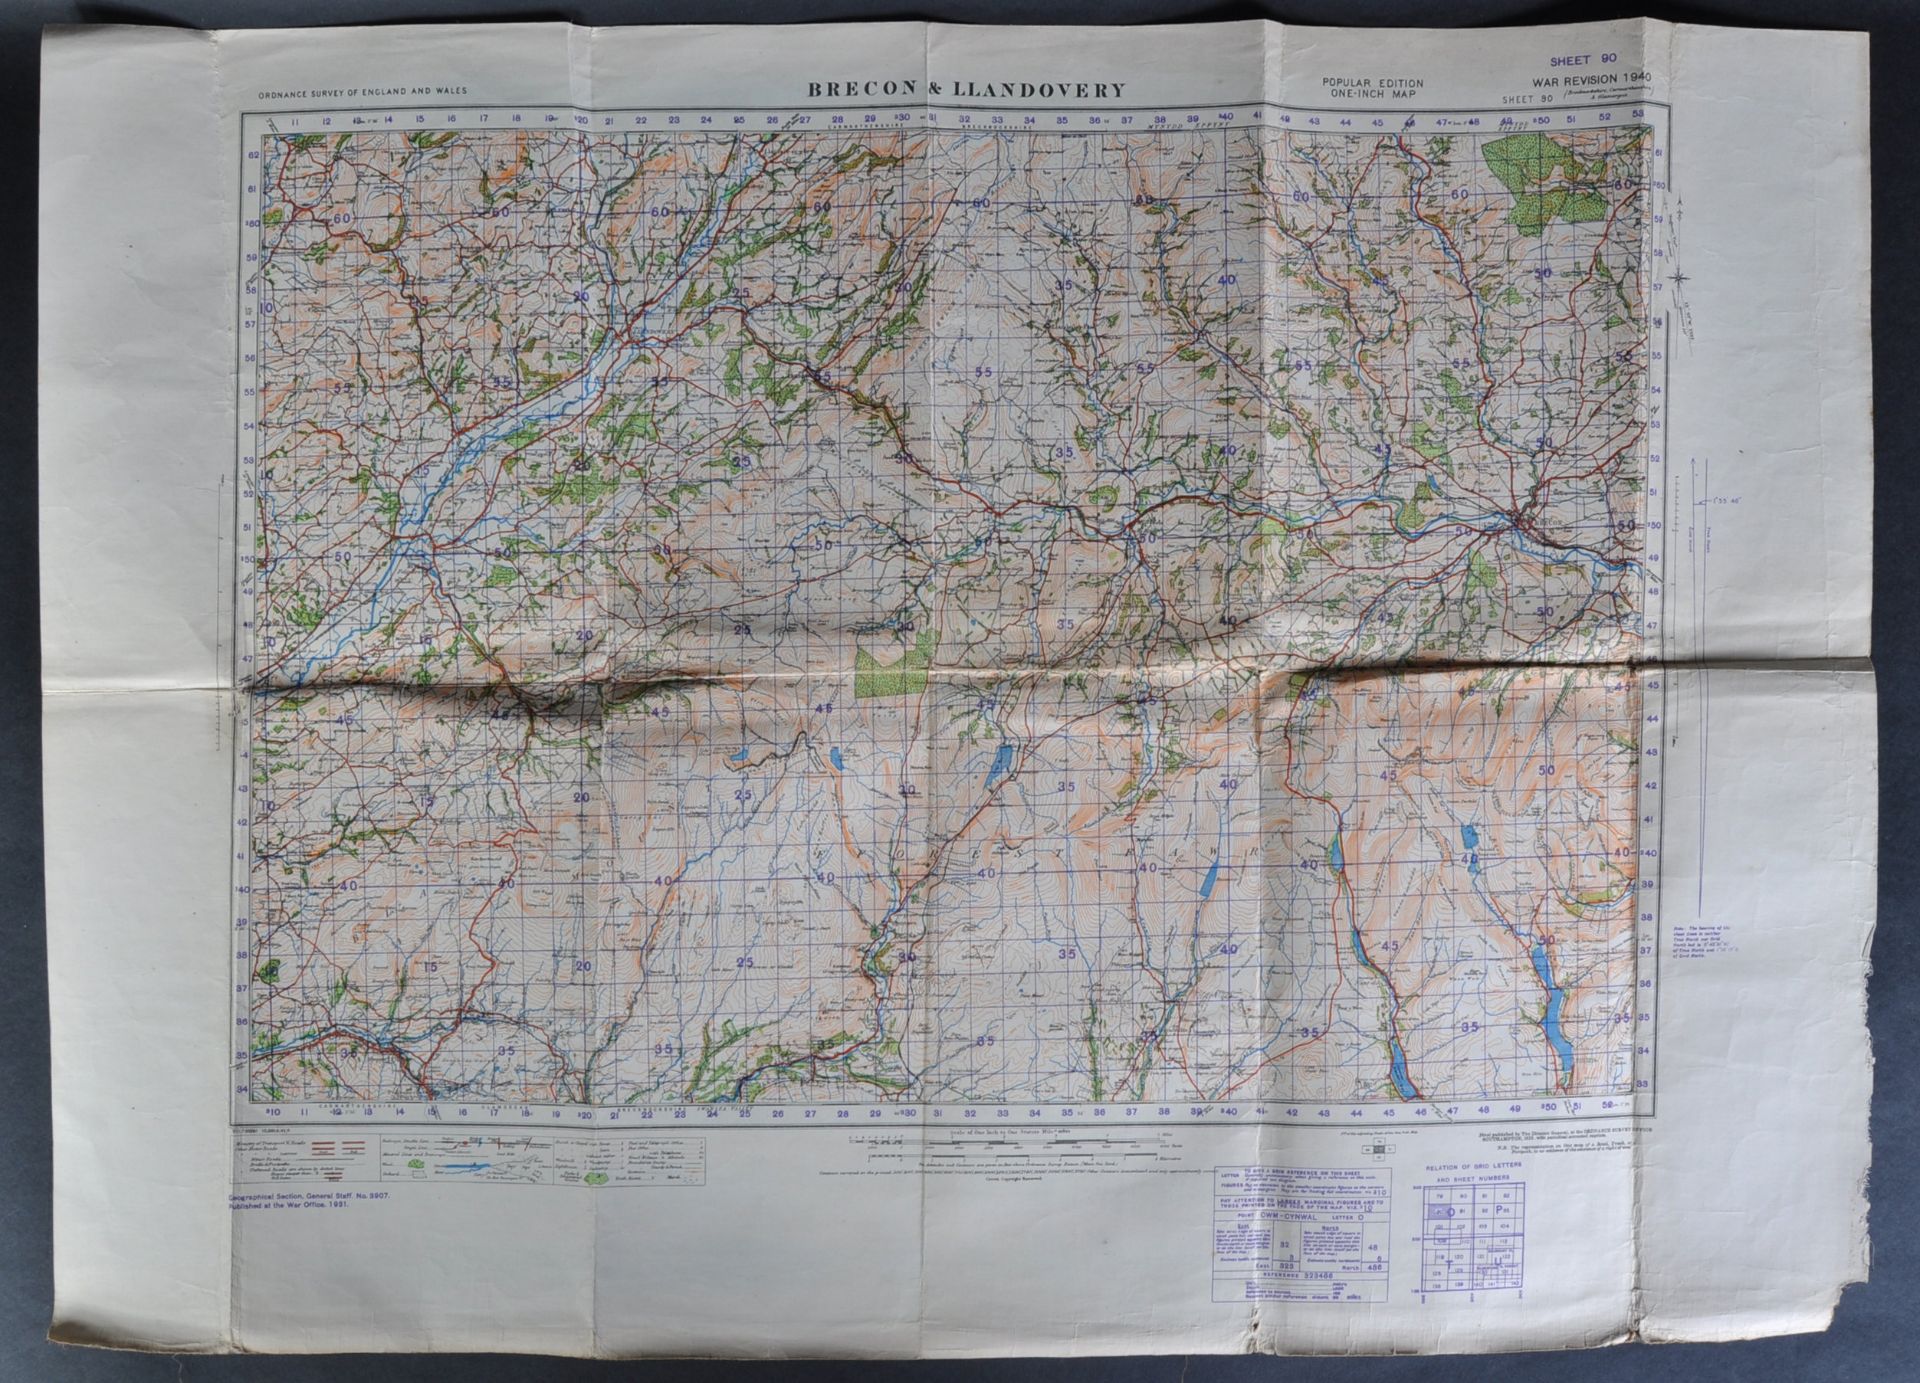 WWII SECOND WORLD WAR ORDNANCE SURVEY MAP - BRECON & LLANDOVERY - Image 2 of 12